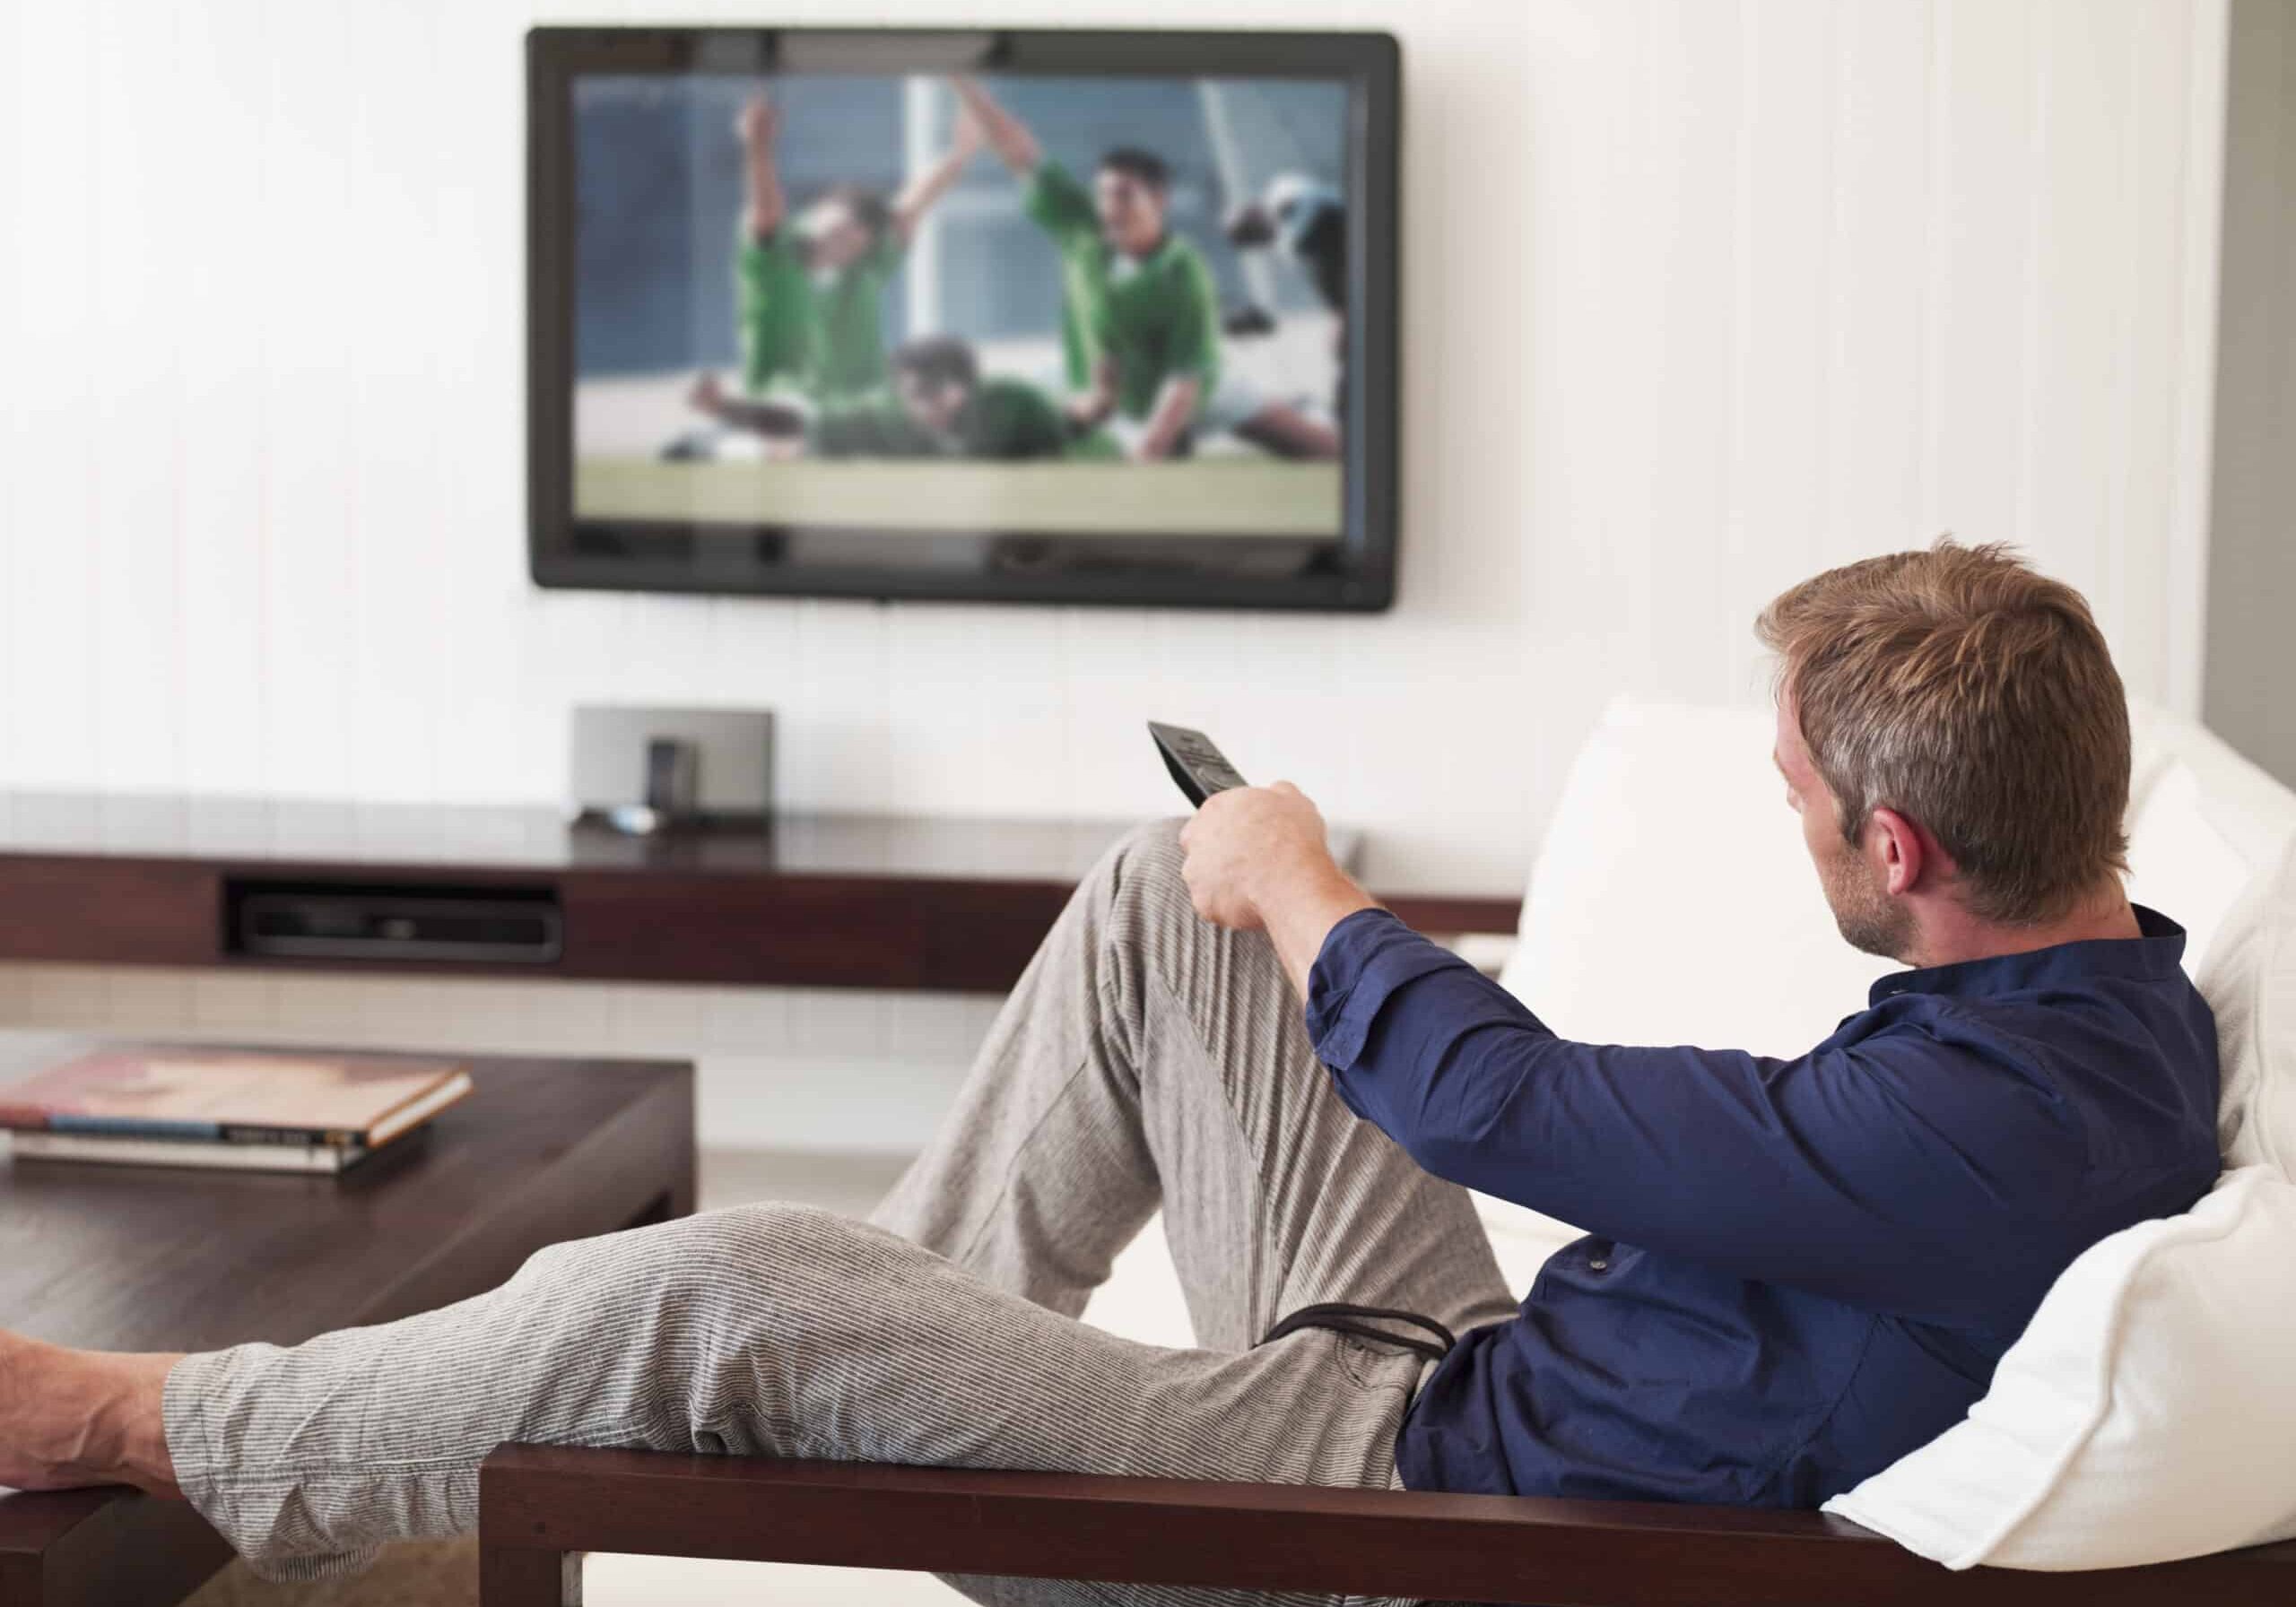 Man changing TV channels with remote control